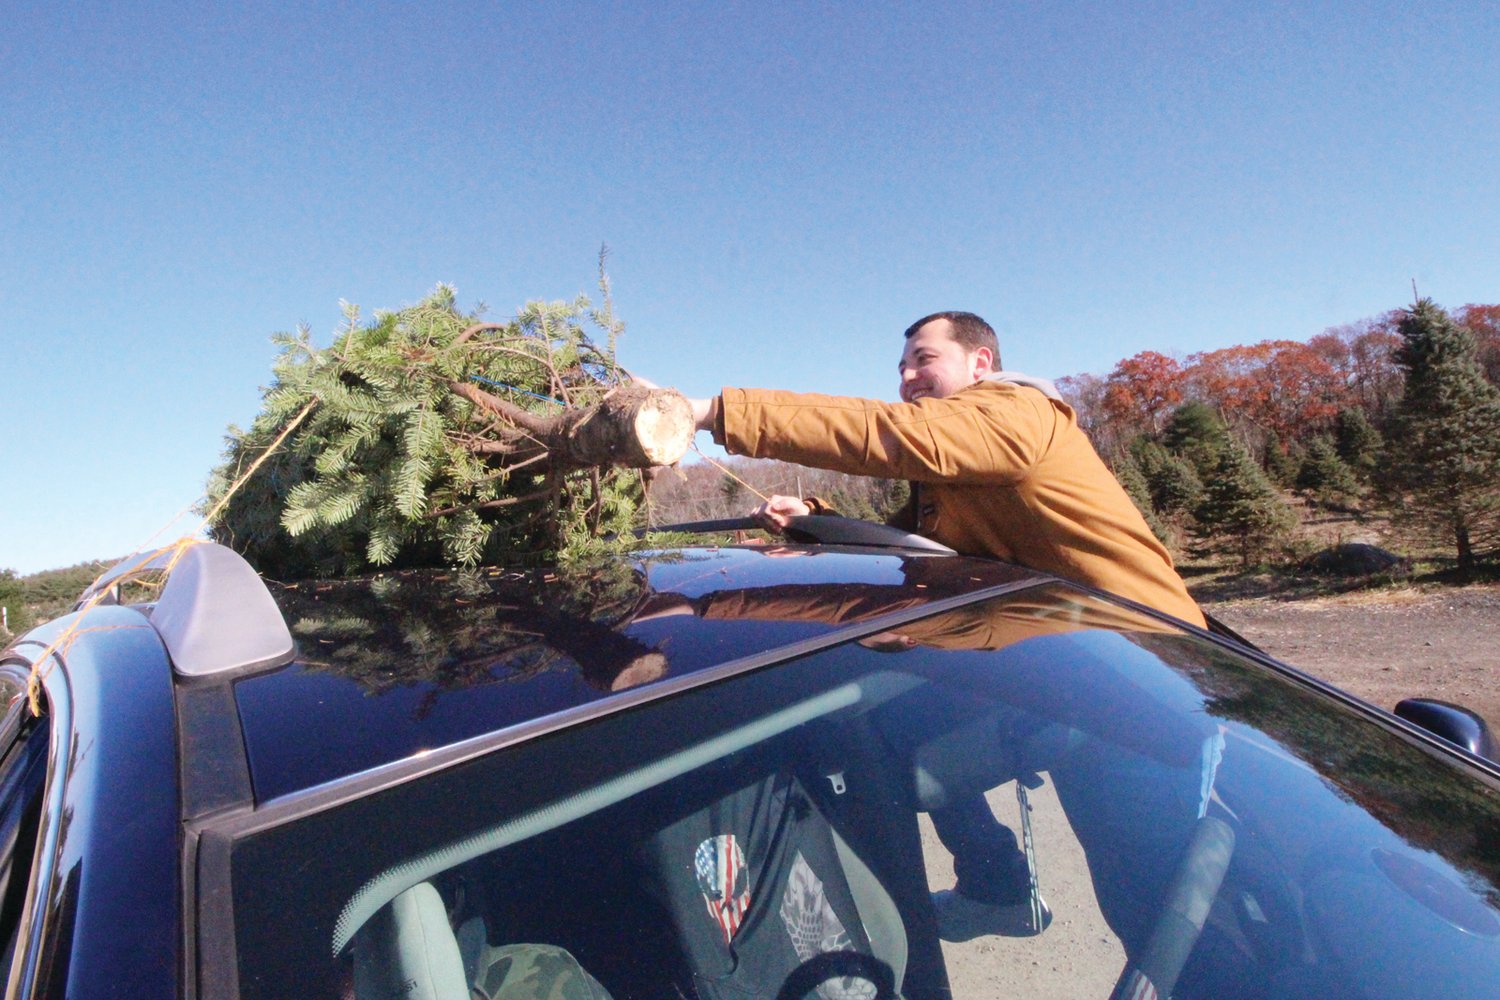 READY FOR THE RIDE: Ryan Brown double-checks the security of his Fraser fir before heading home to Warwick from Leyden’s.